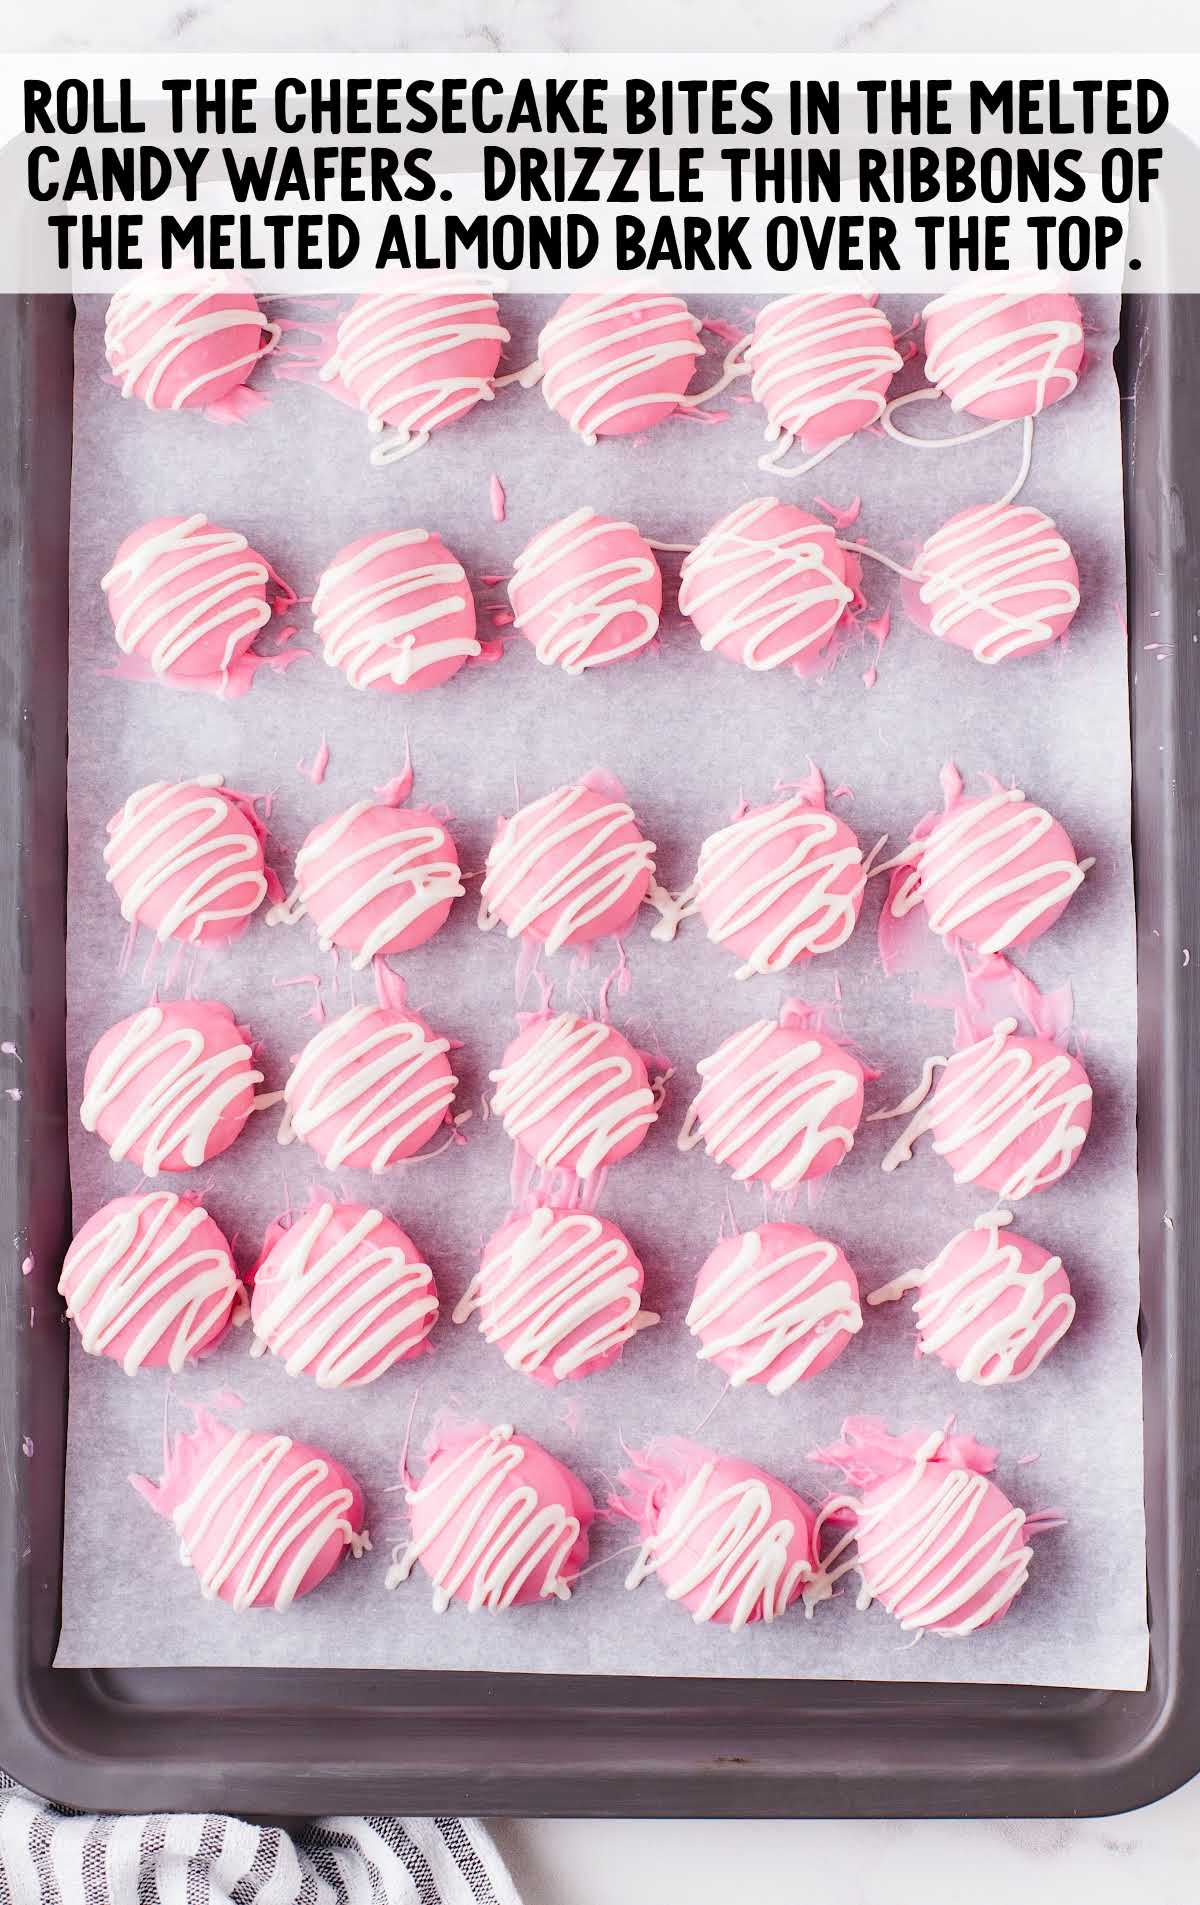 thin ribbons drizzled on top of the bites on a baking sheet